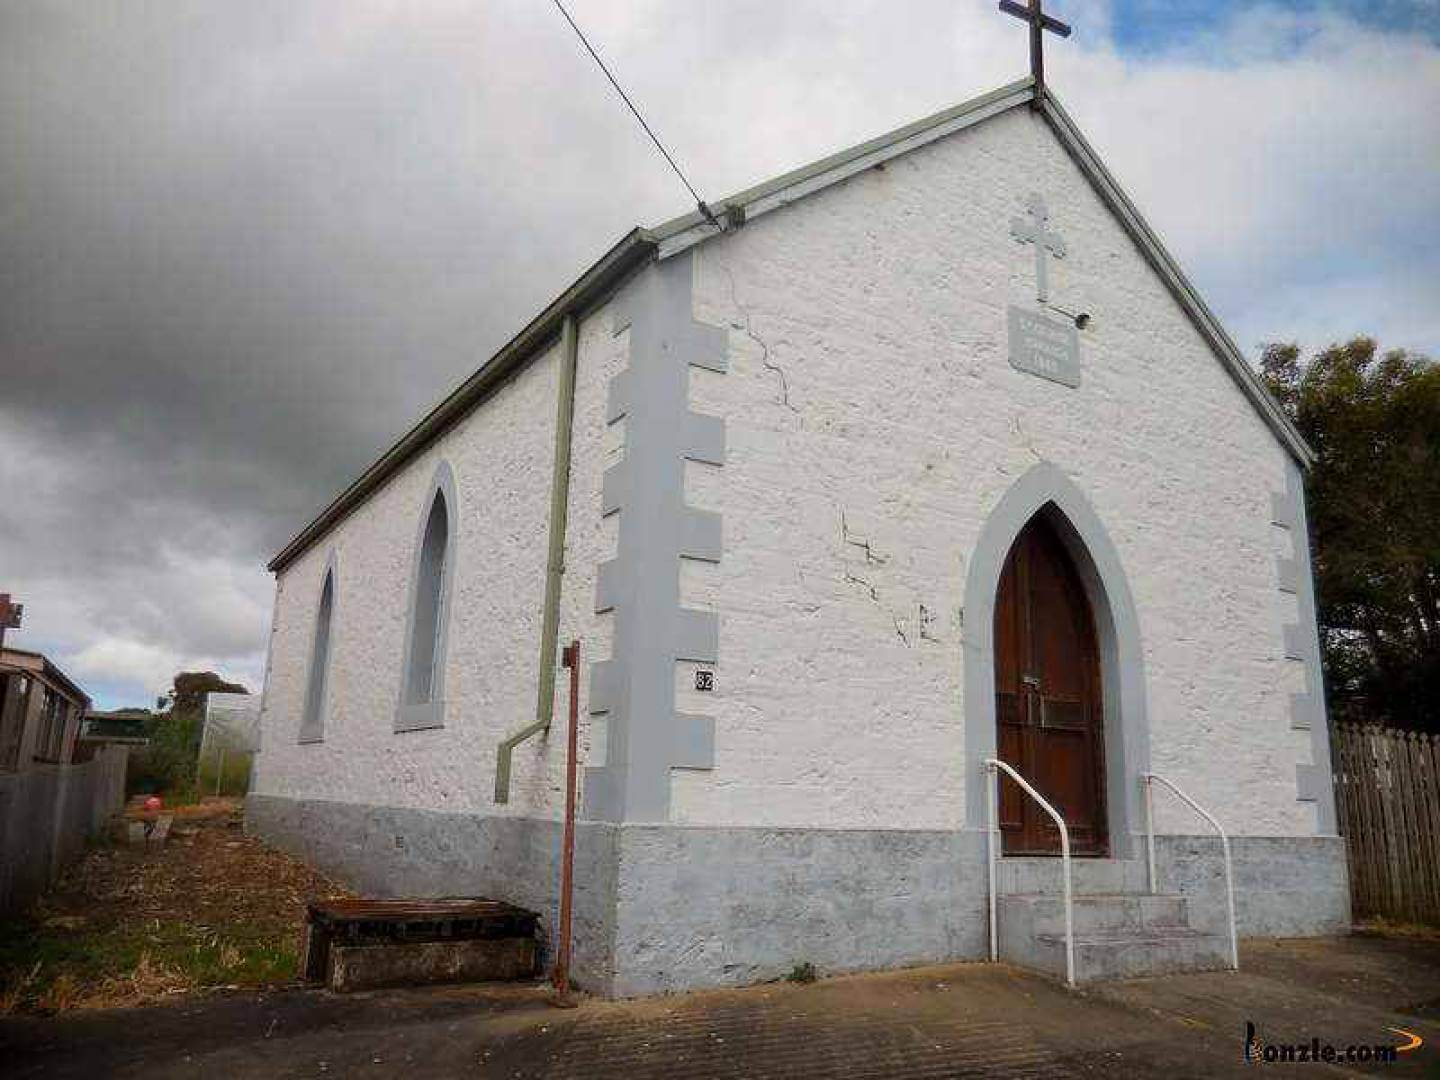 St George's Anglican Church